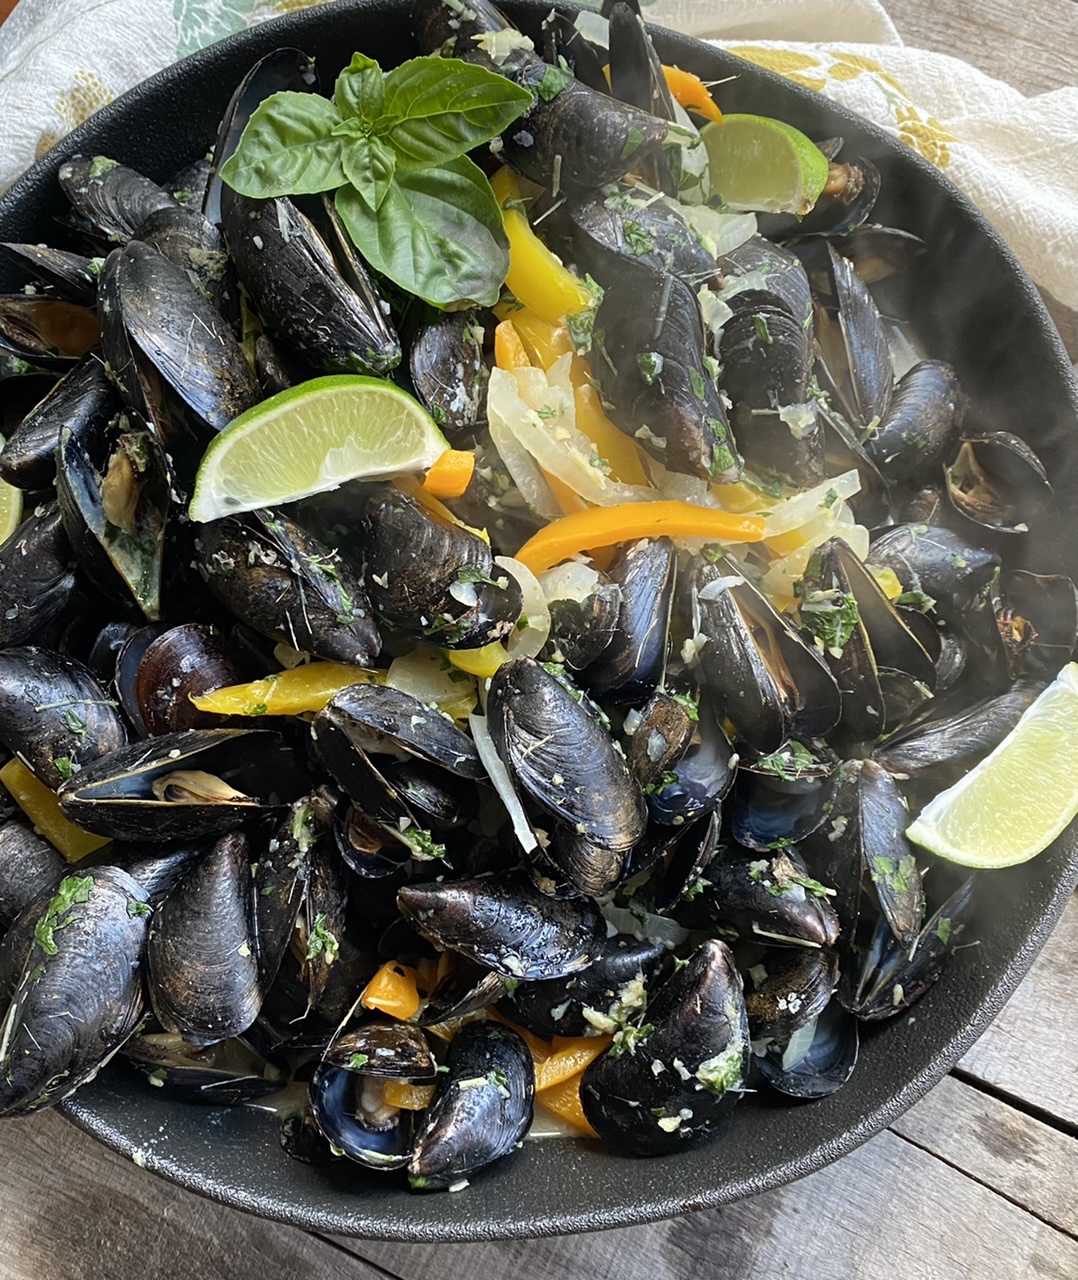 40F8307B 44D1 4B71 9C60 68B174E88C03 - Green Curry Lemongrass Mussels with Peppers & Onions